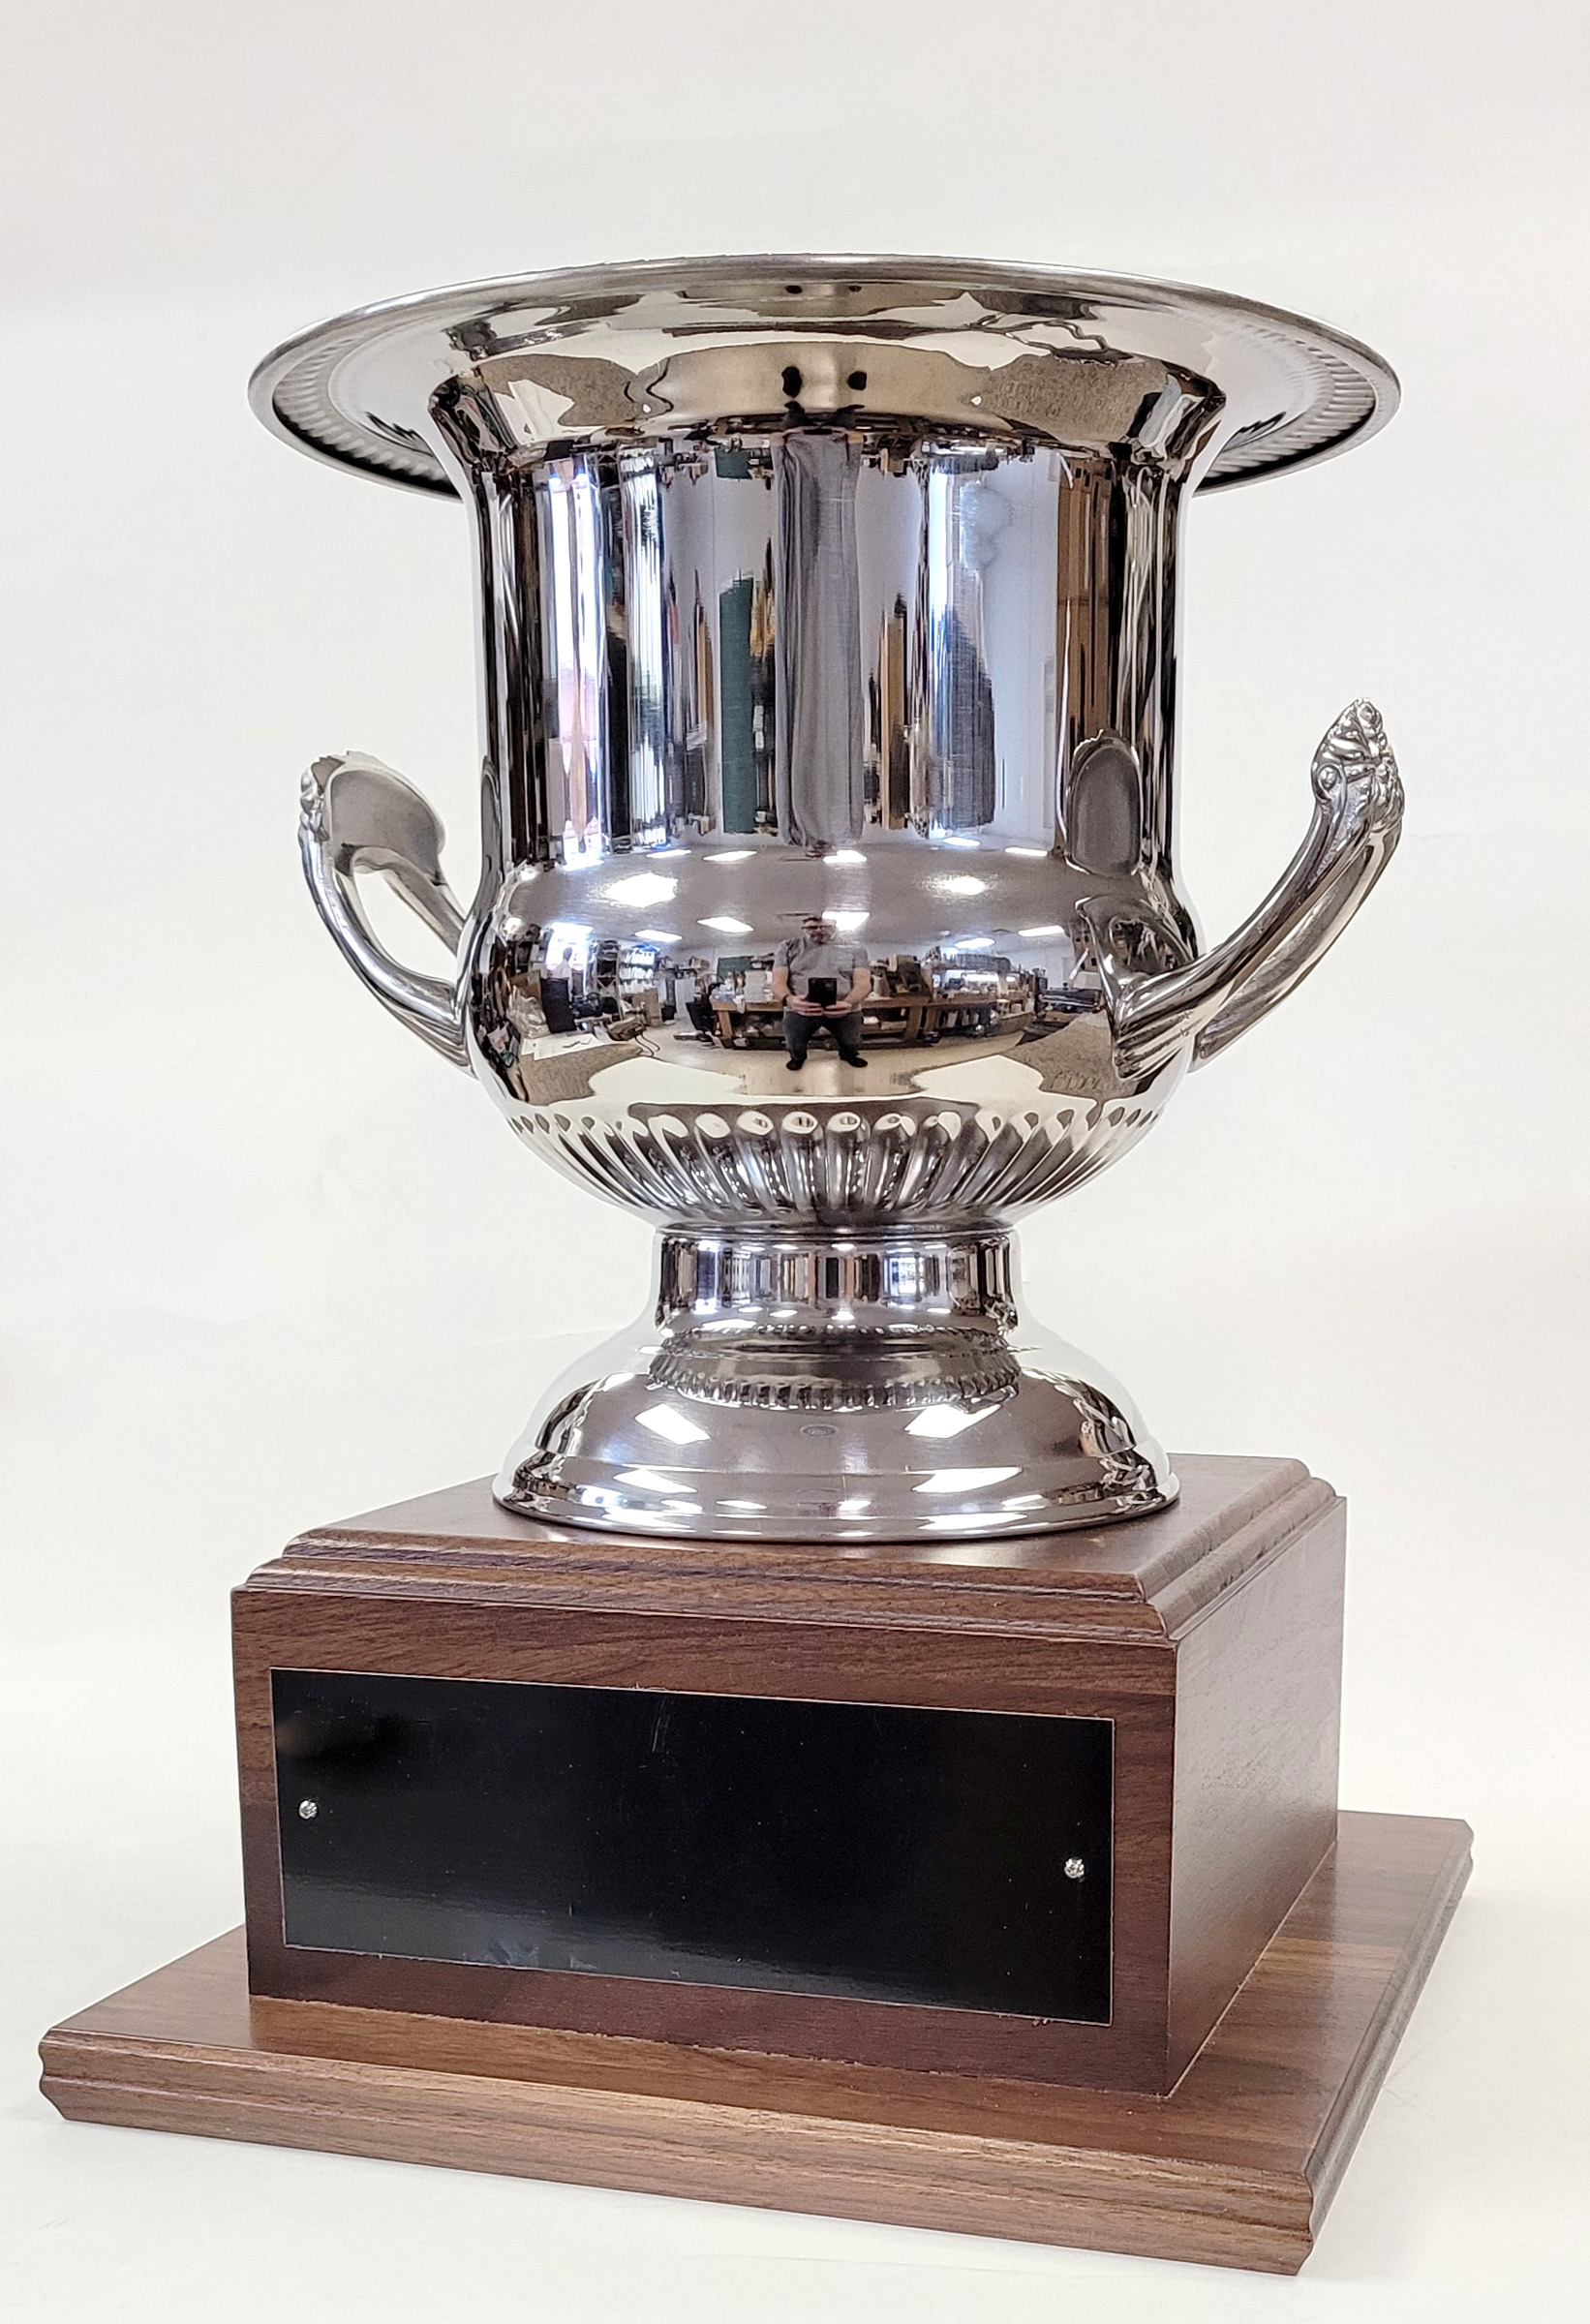 13 Inch Tall Silver Plated Stainless Steel Wine Cooler Cup on Walnut Base